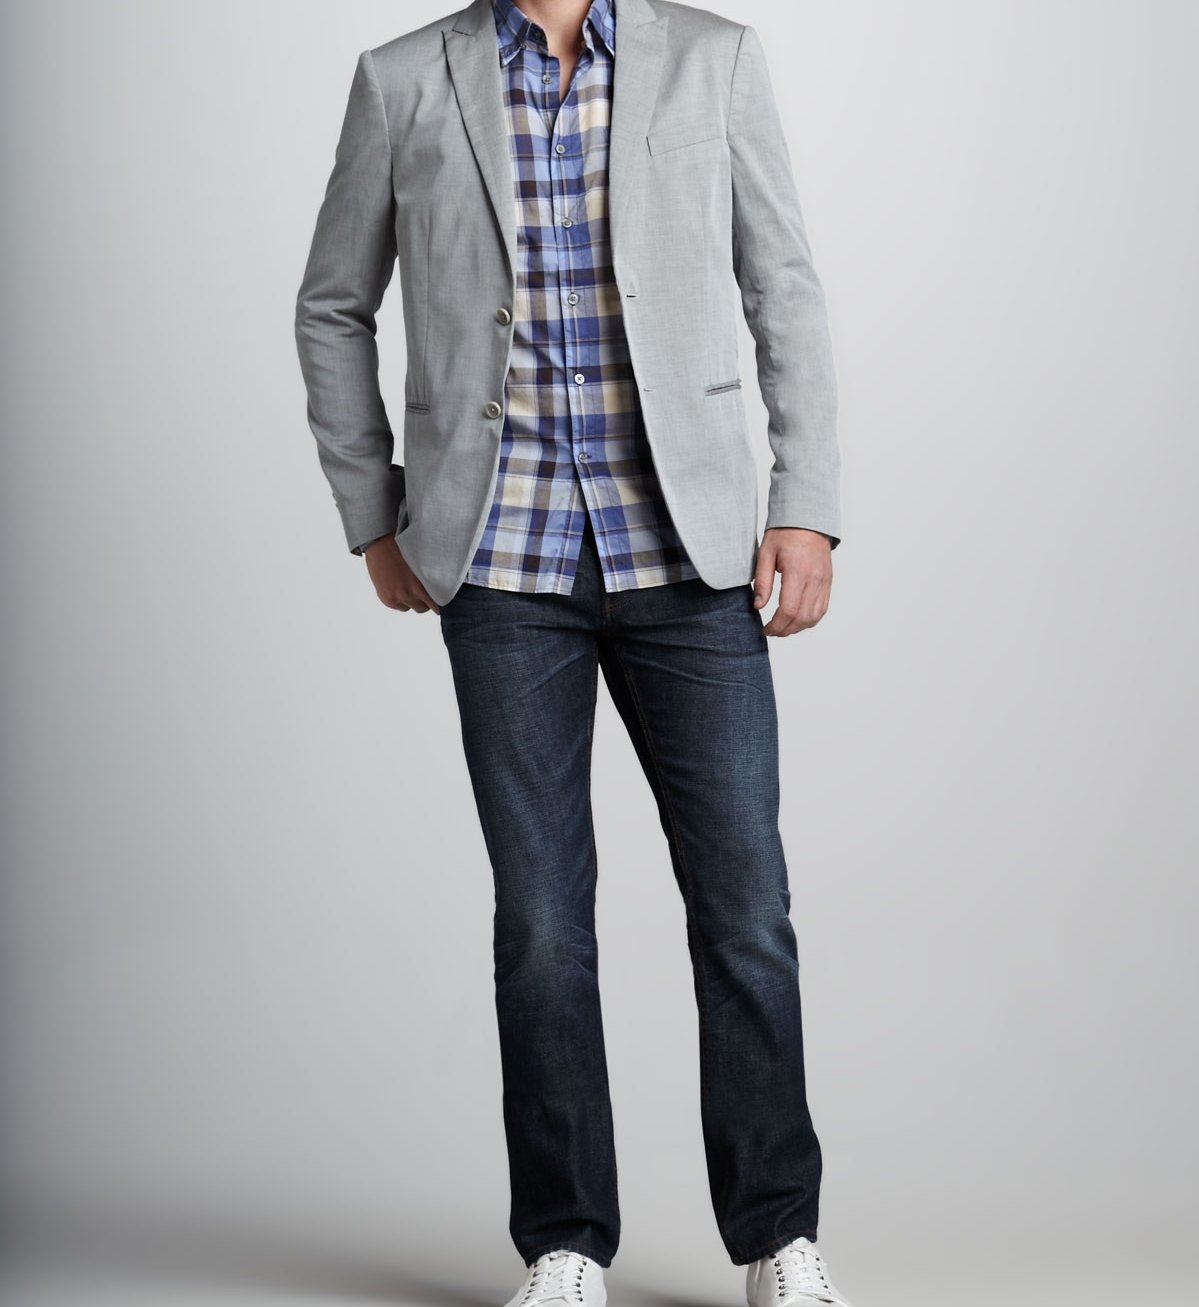 Sport Coat with Jeans Fit 10 Necessary Rules for Wearing a Sport Coat or Suit Jacket with Jeans